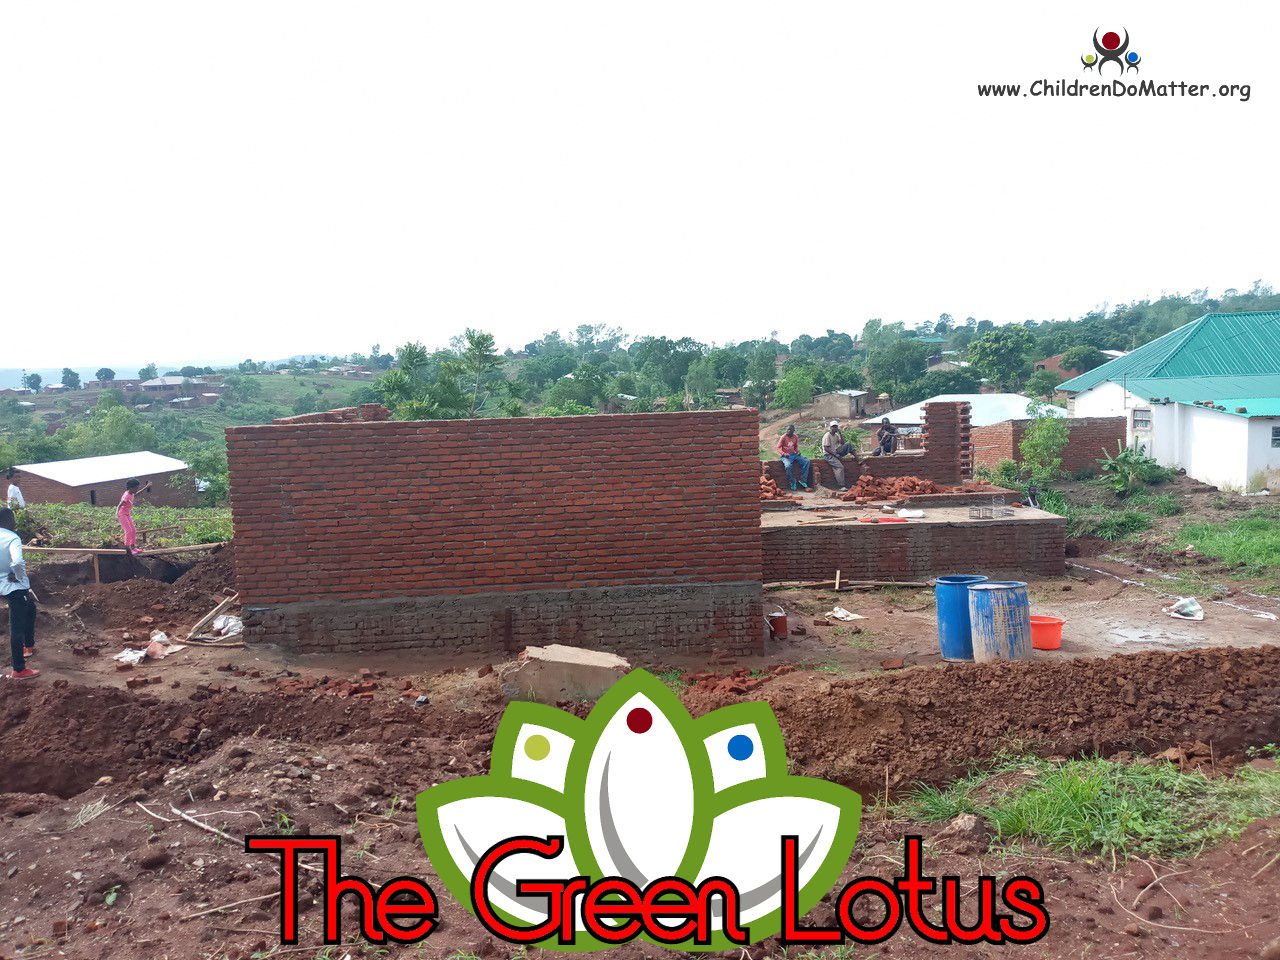 the making of the green lotus orphanage in blantyre malawi - children do matter - 10